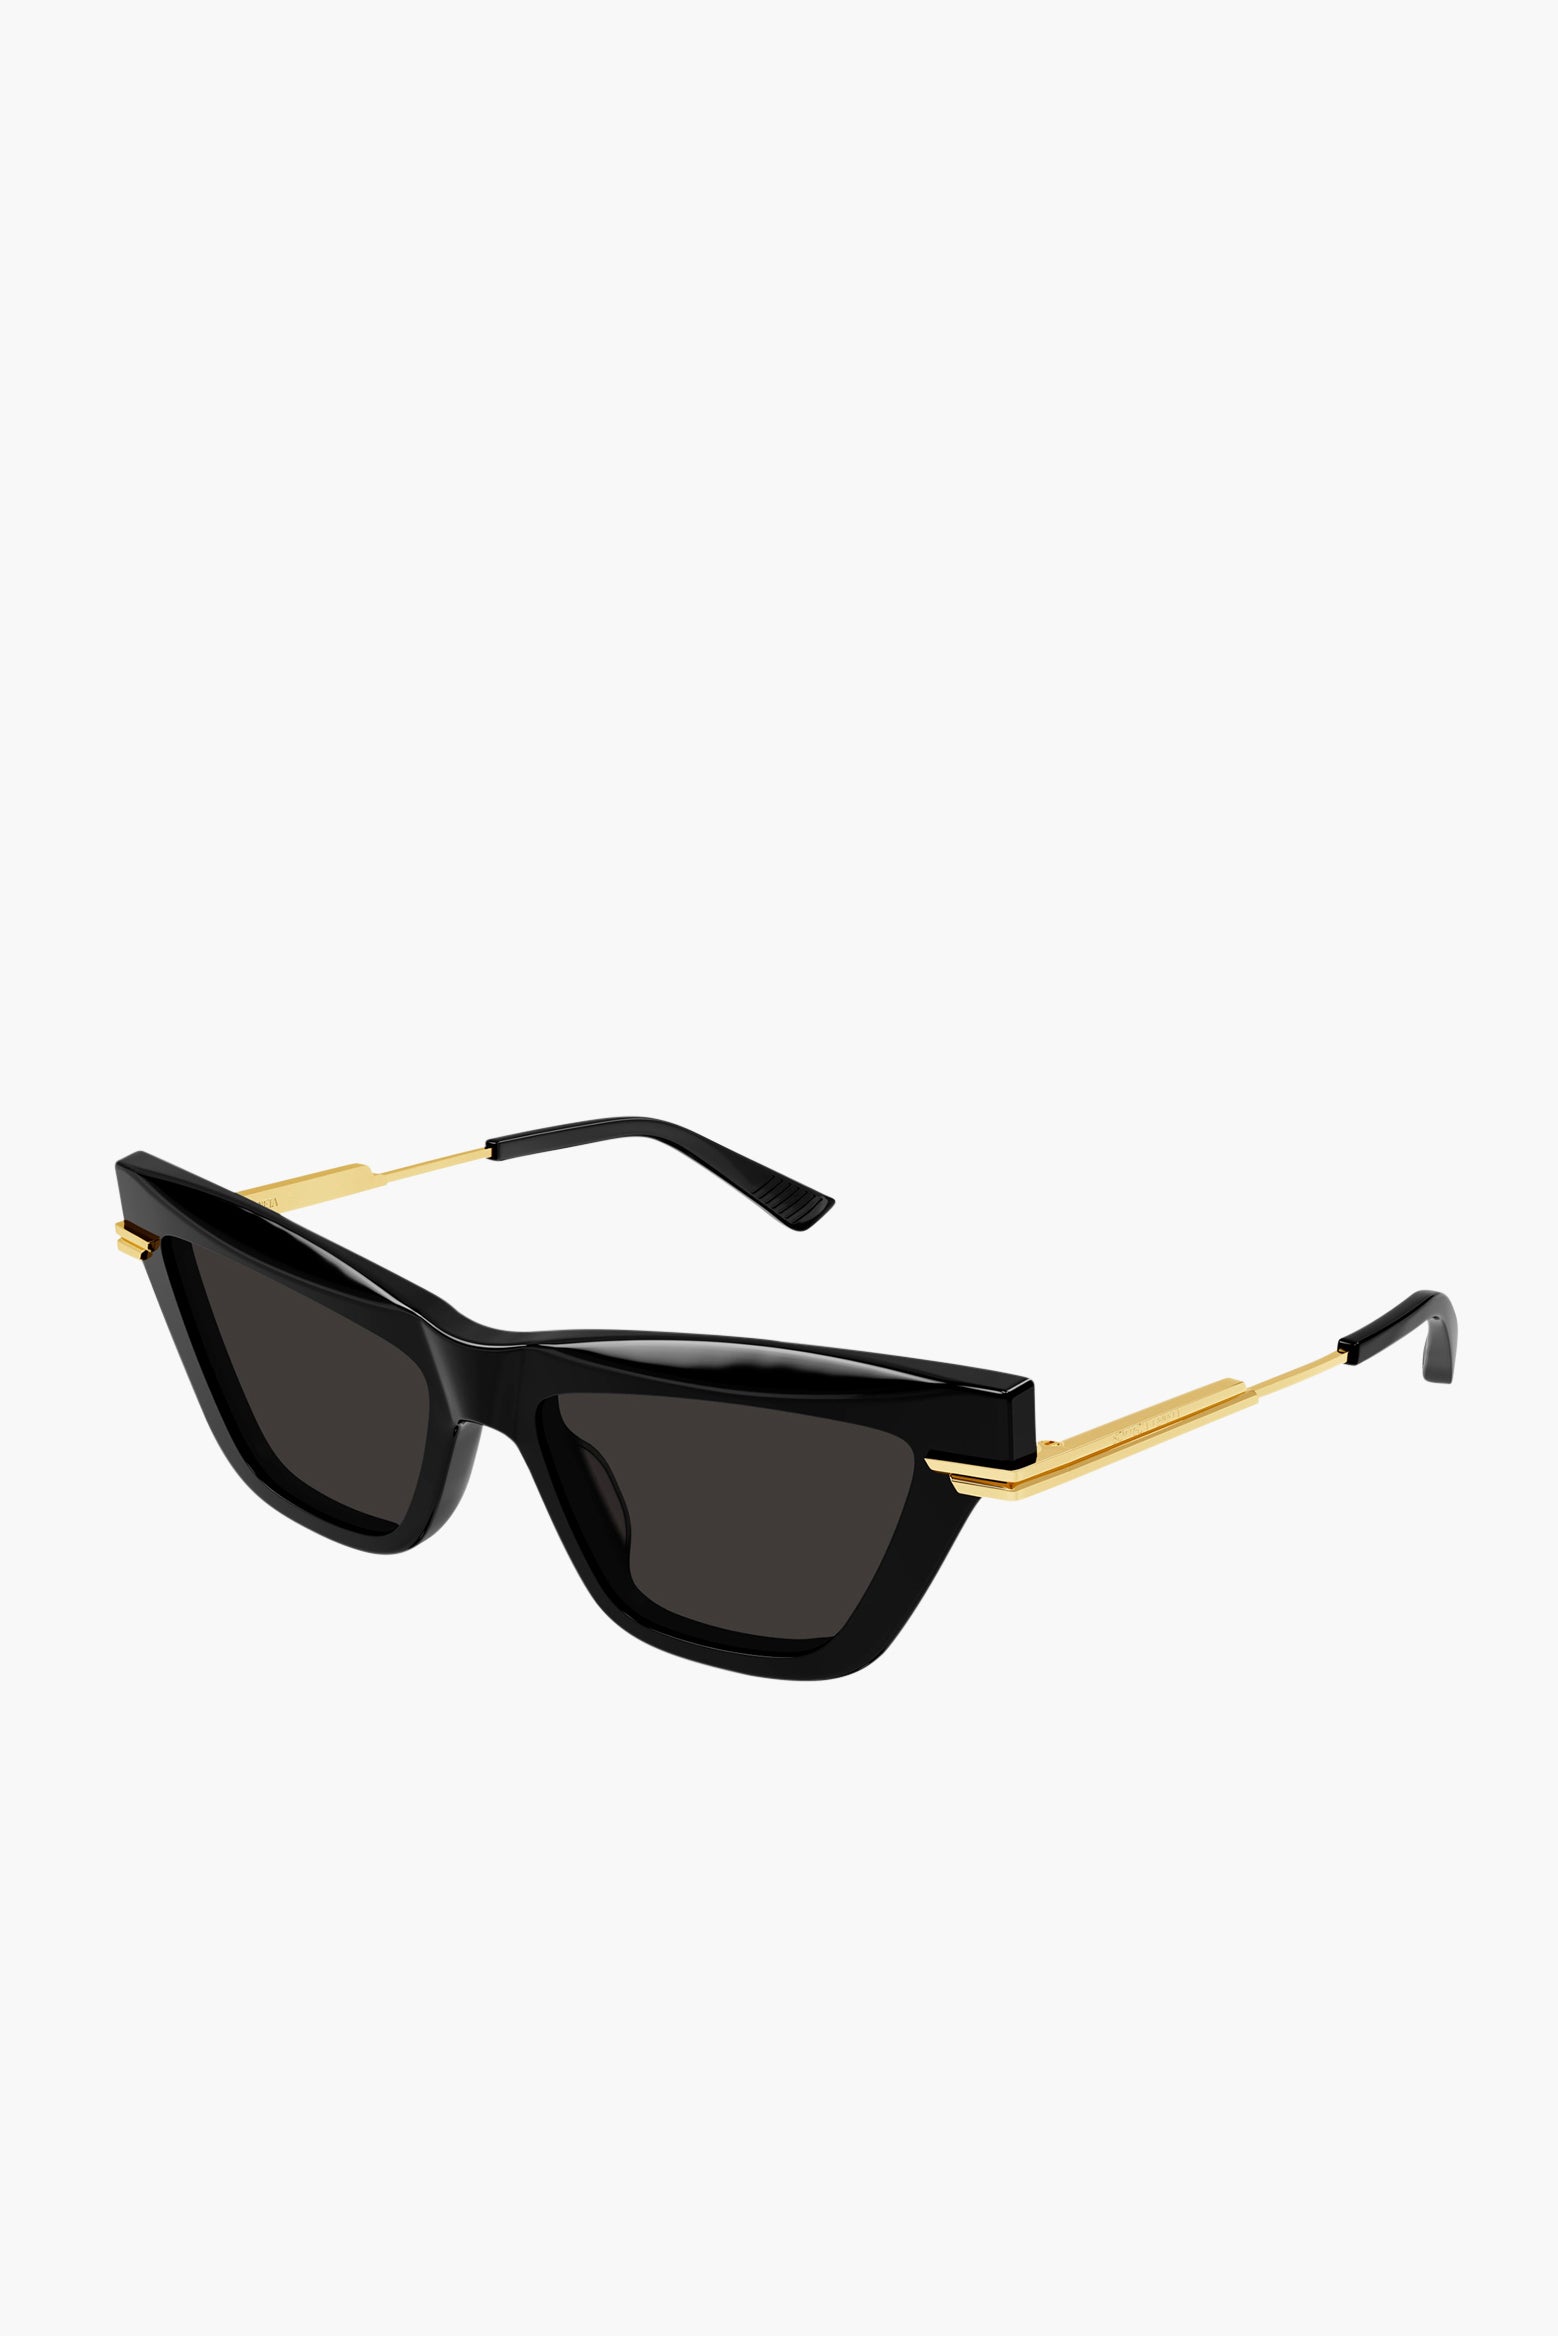 Black Pinstriped Spider Web Classic Cat Eye Sunglasses | Double Trouble  Apparel